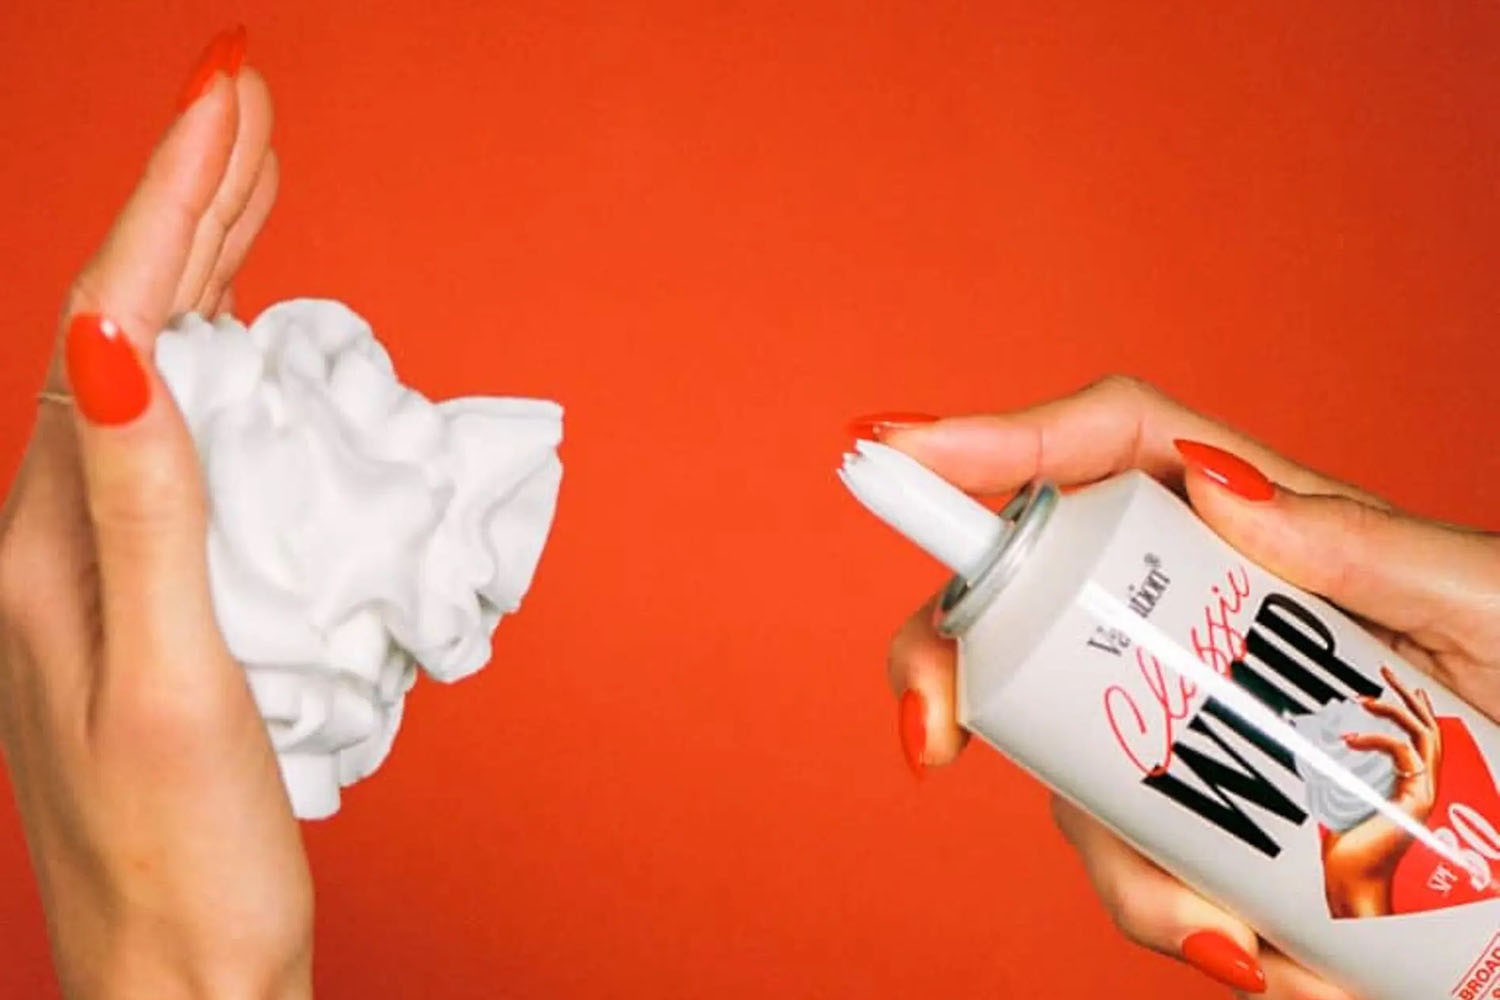 a can of vacation whip sunscreen and a hand with sunscreen on a red background